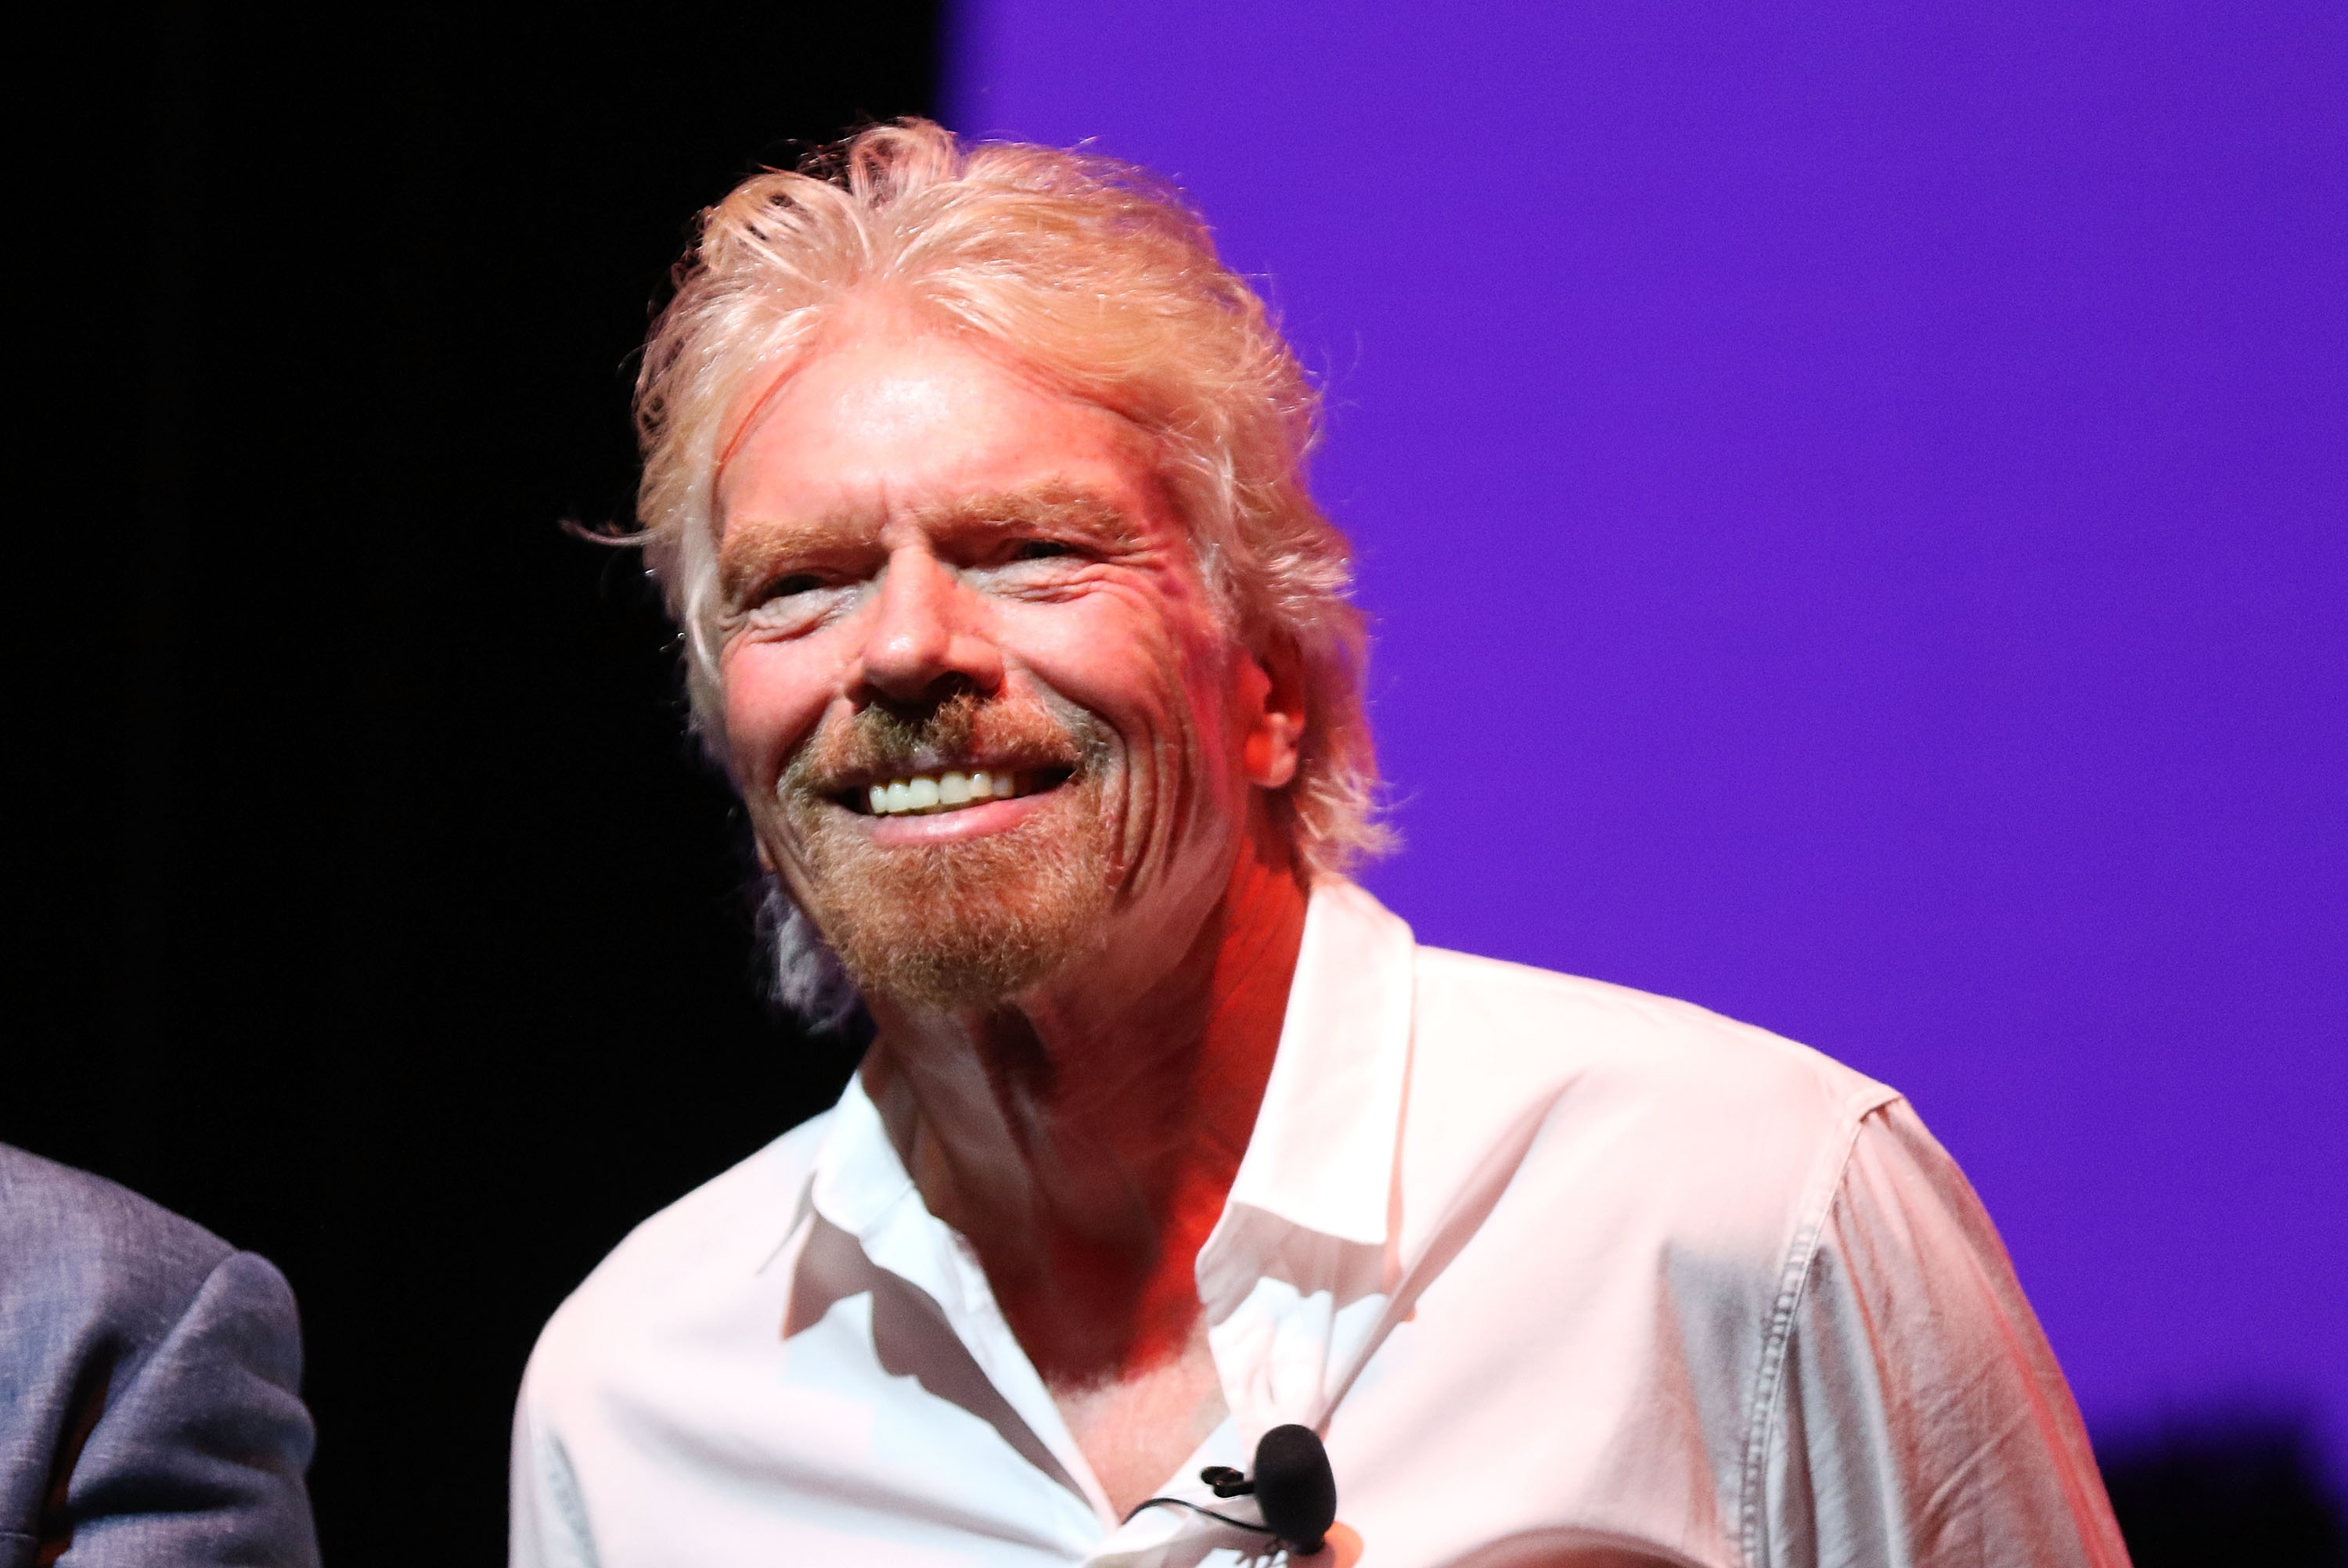 Richard Branson on Hot Air Ballooning and Risks Worth Taking